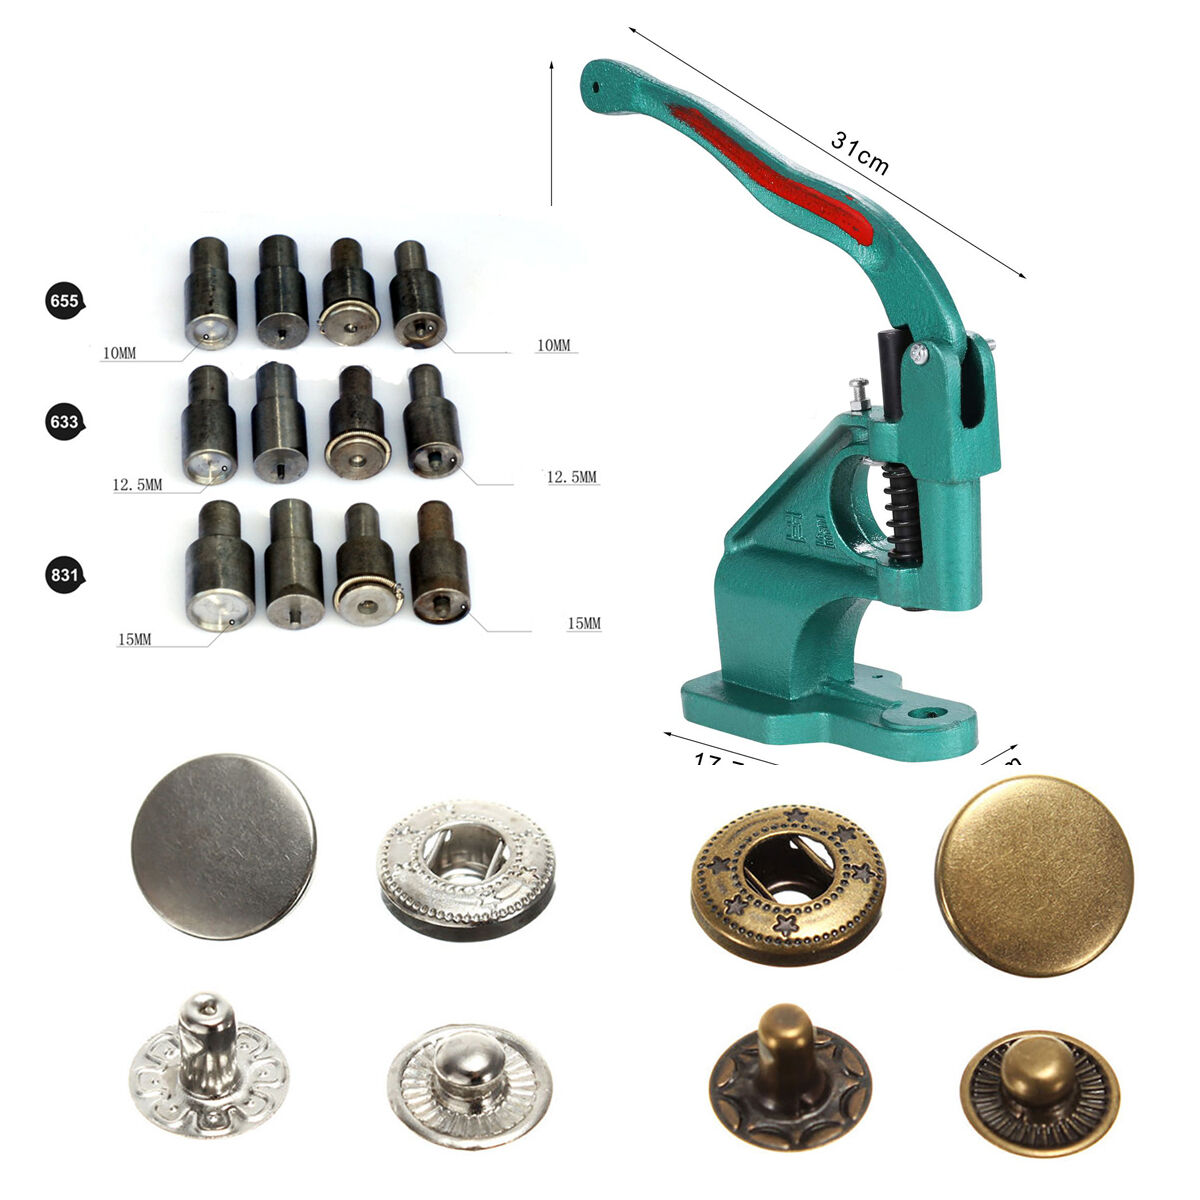 831 633 665 Snap Pressing Machine Snap On Tool Various Dies Sets Snap Fasteners  artec Does Not Apply